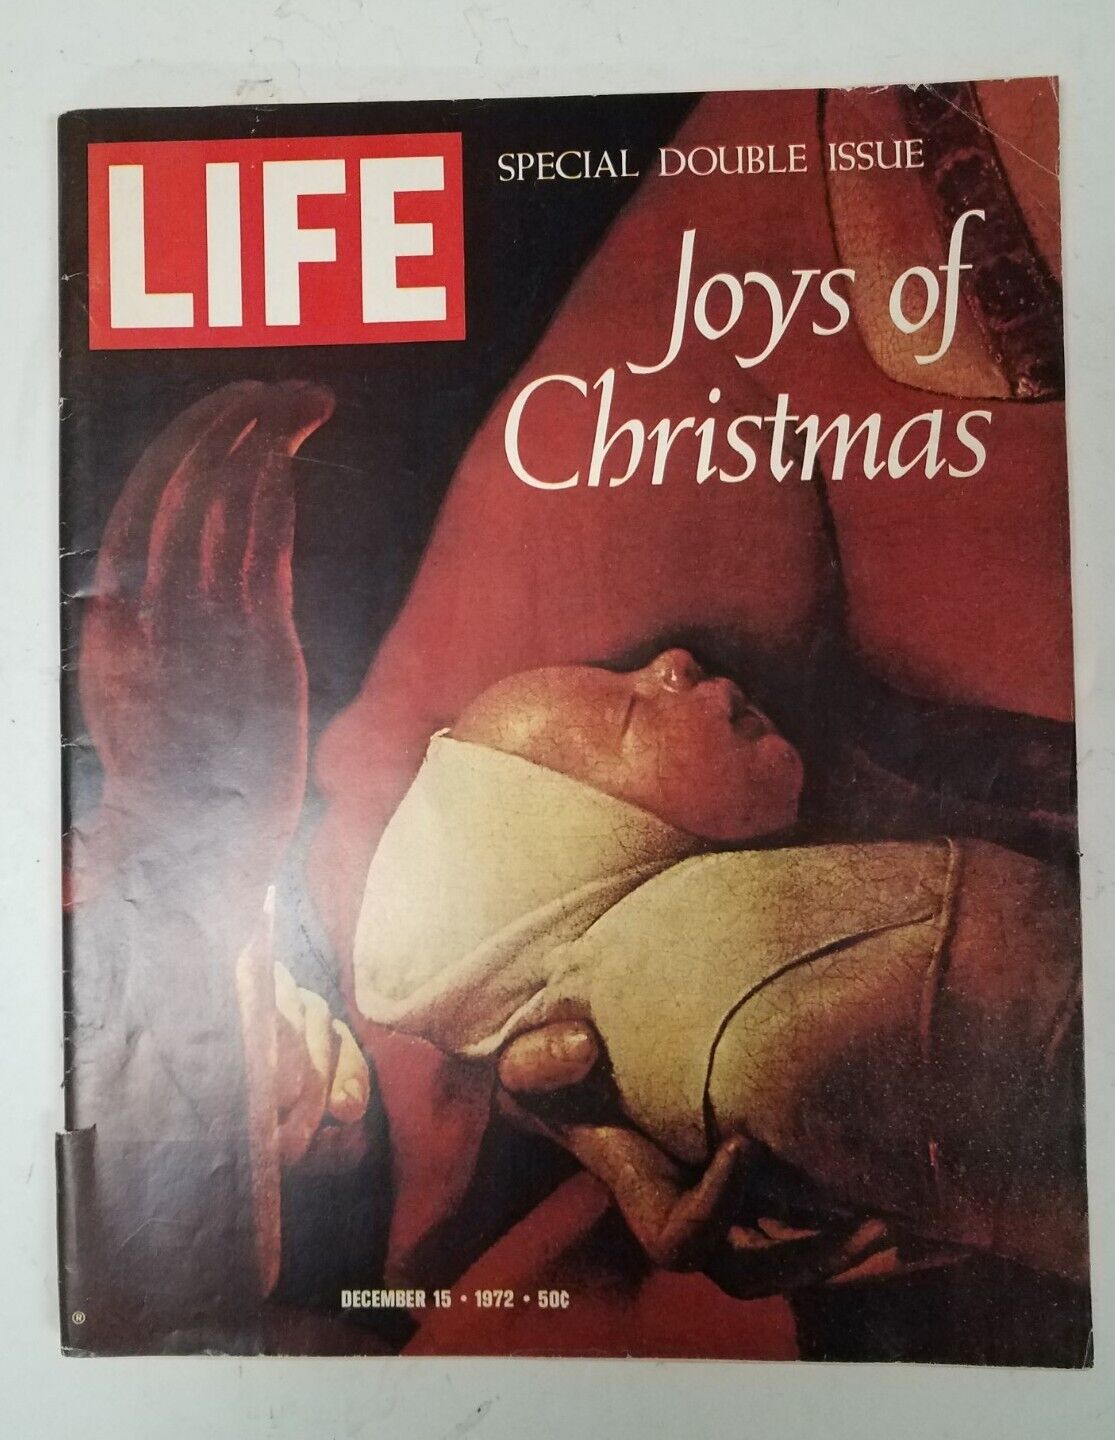 LIFE Magazine December 15, 1972 SPECIAL 1972 DOUBLE JOYS OF CHRISTMAS ISSUE